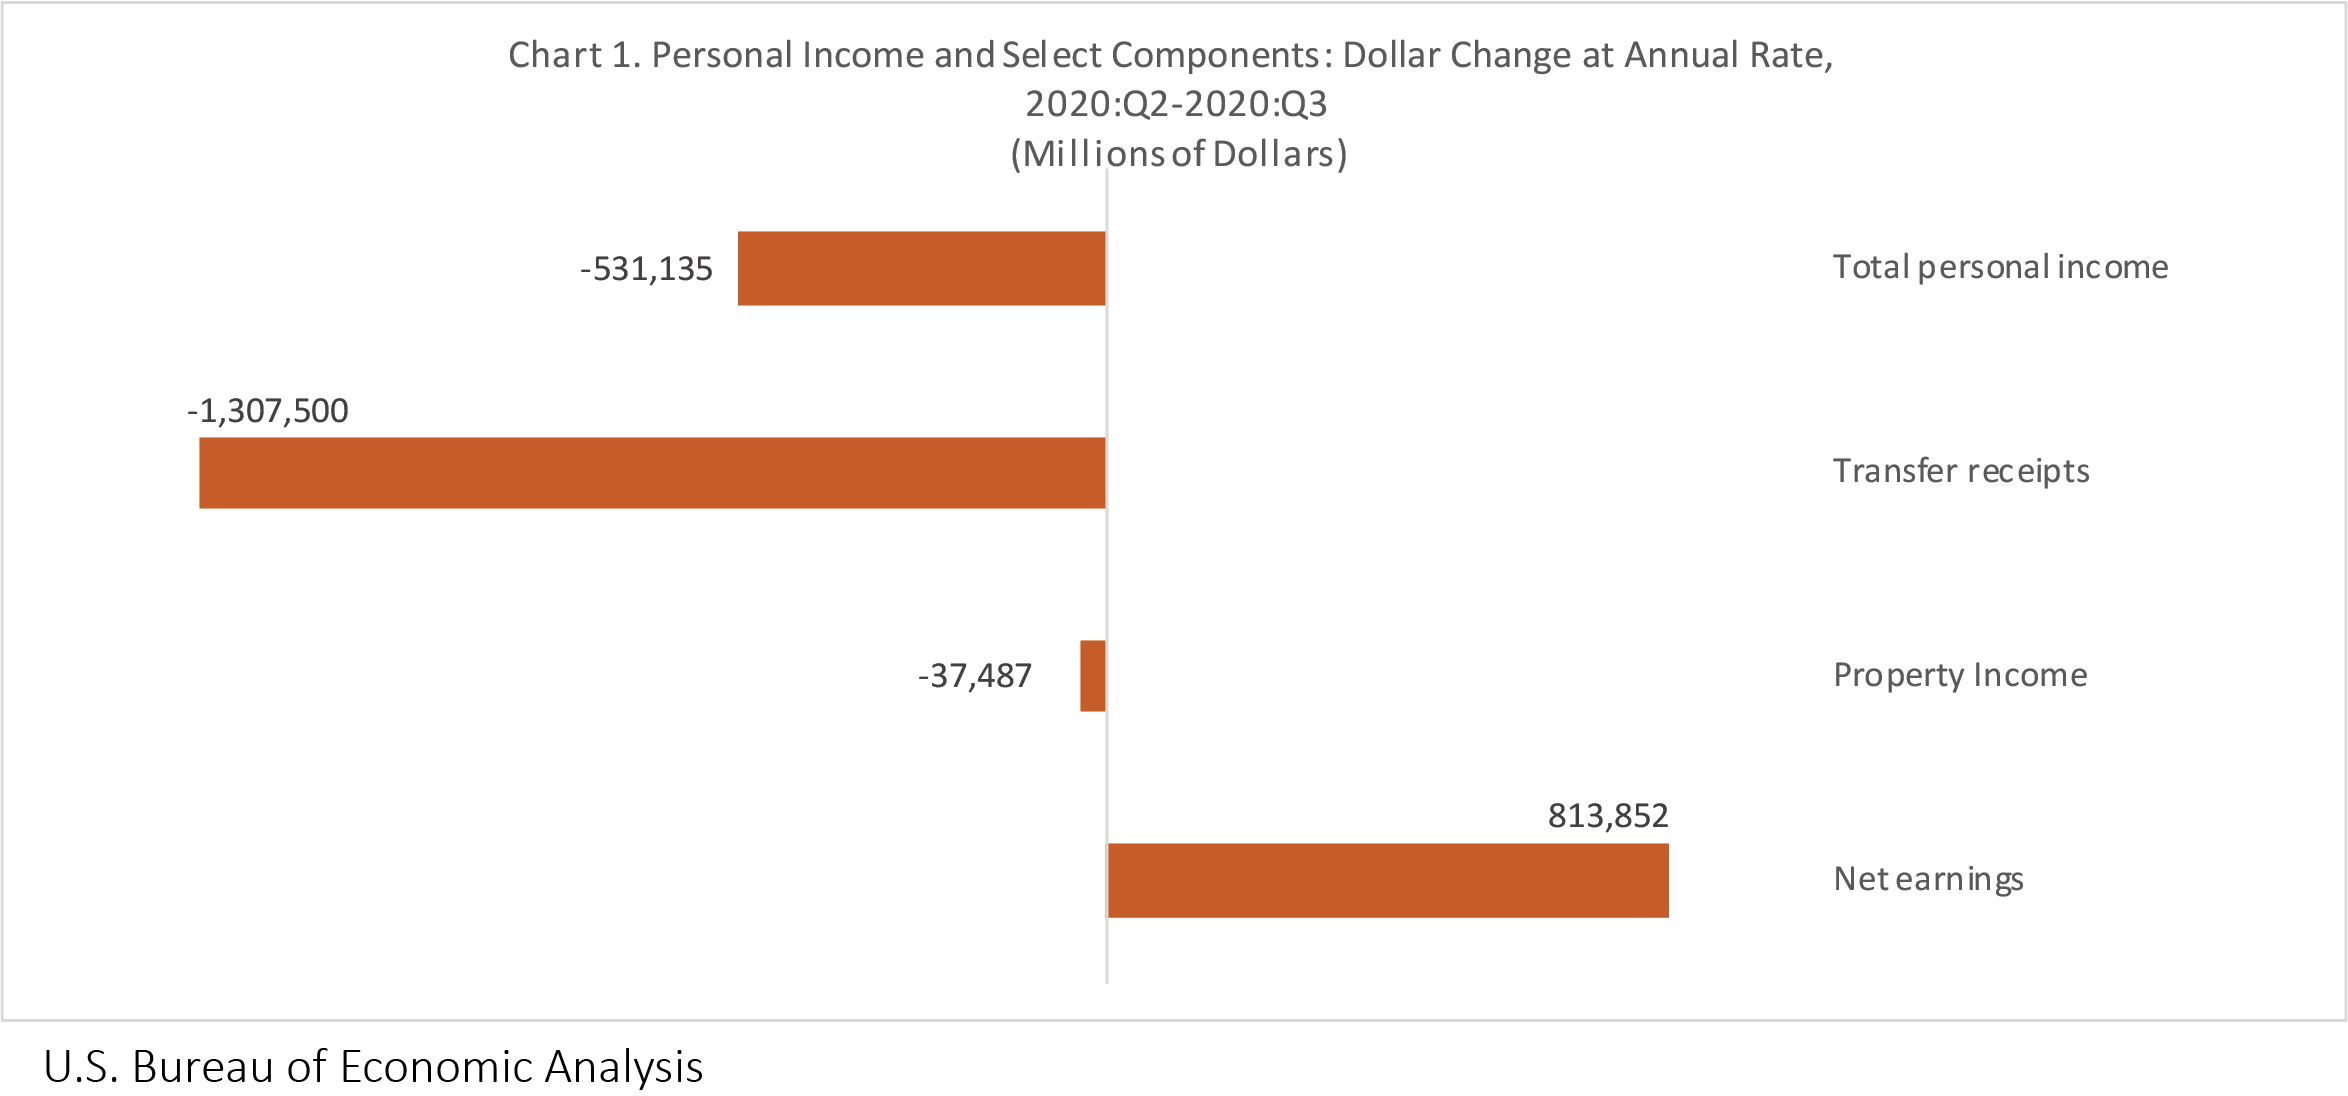 Chart 1. Dollar Change in Personal Income and Select Components, US: 2020 Q2-Q3